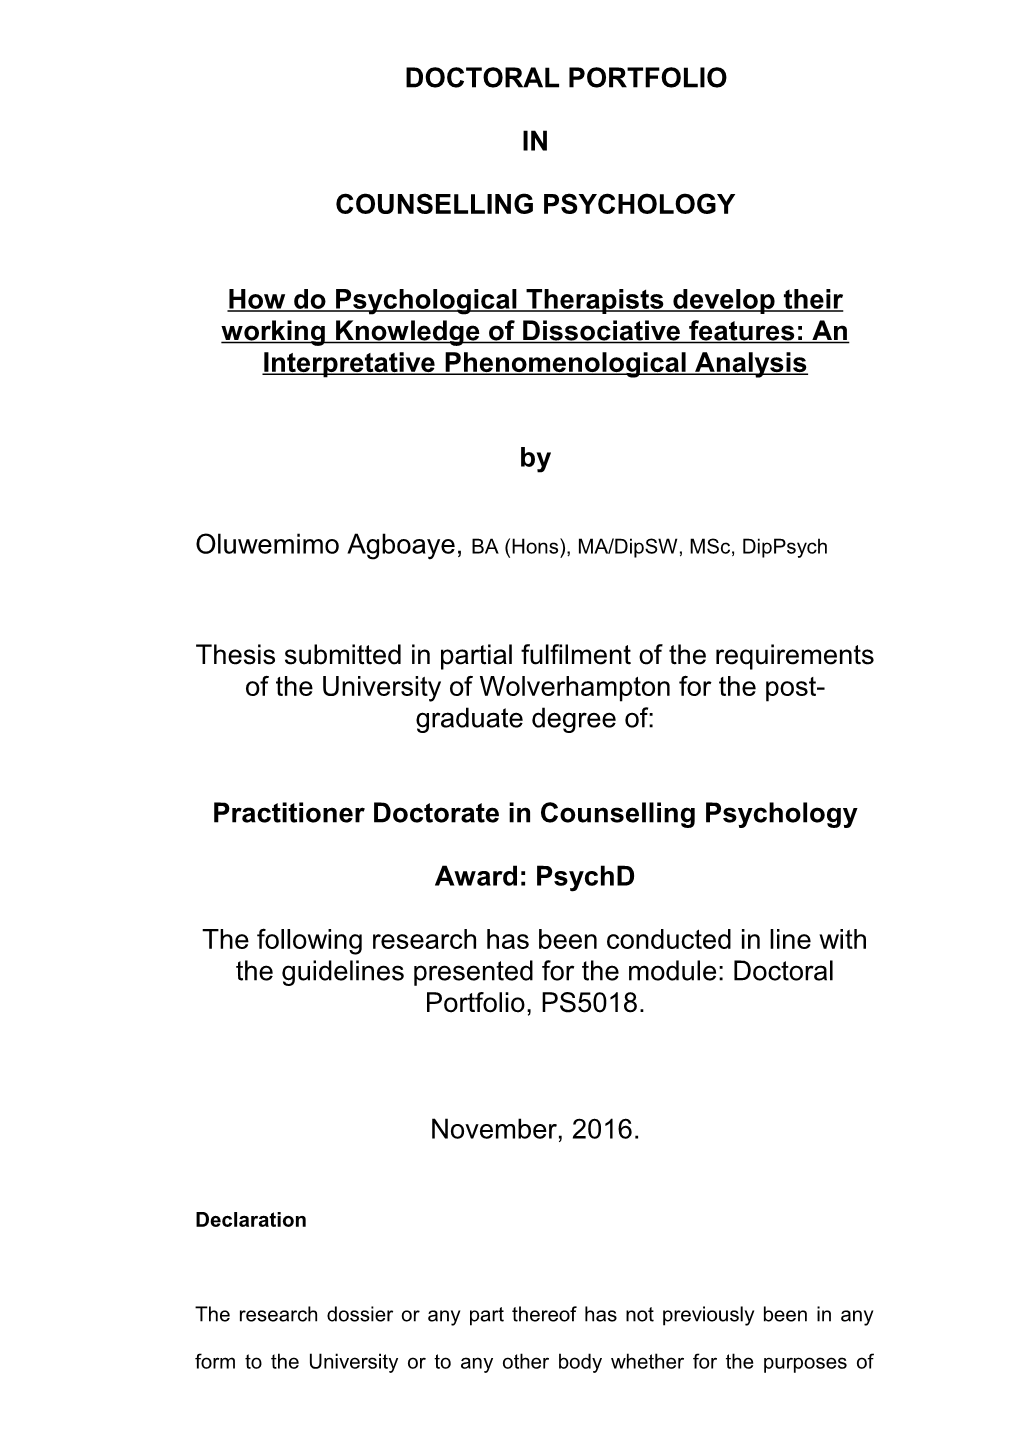 Wemi Agboaye Doctoral Portfolio in Counselling Psychology